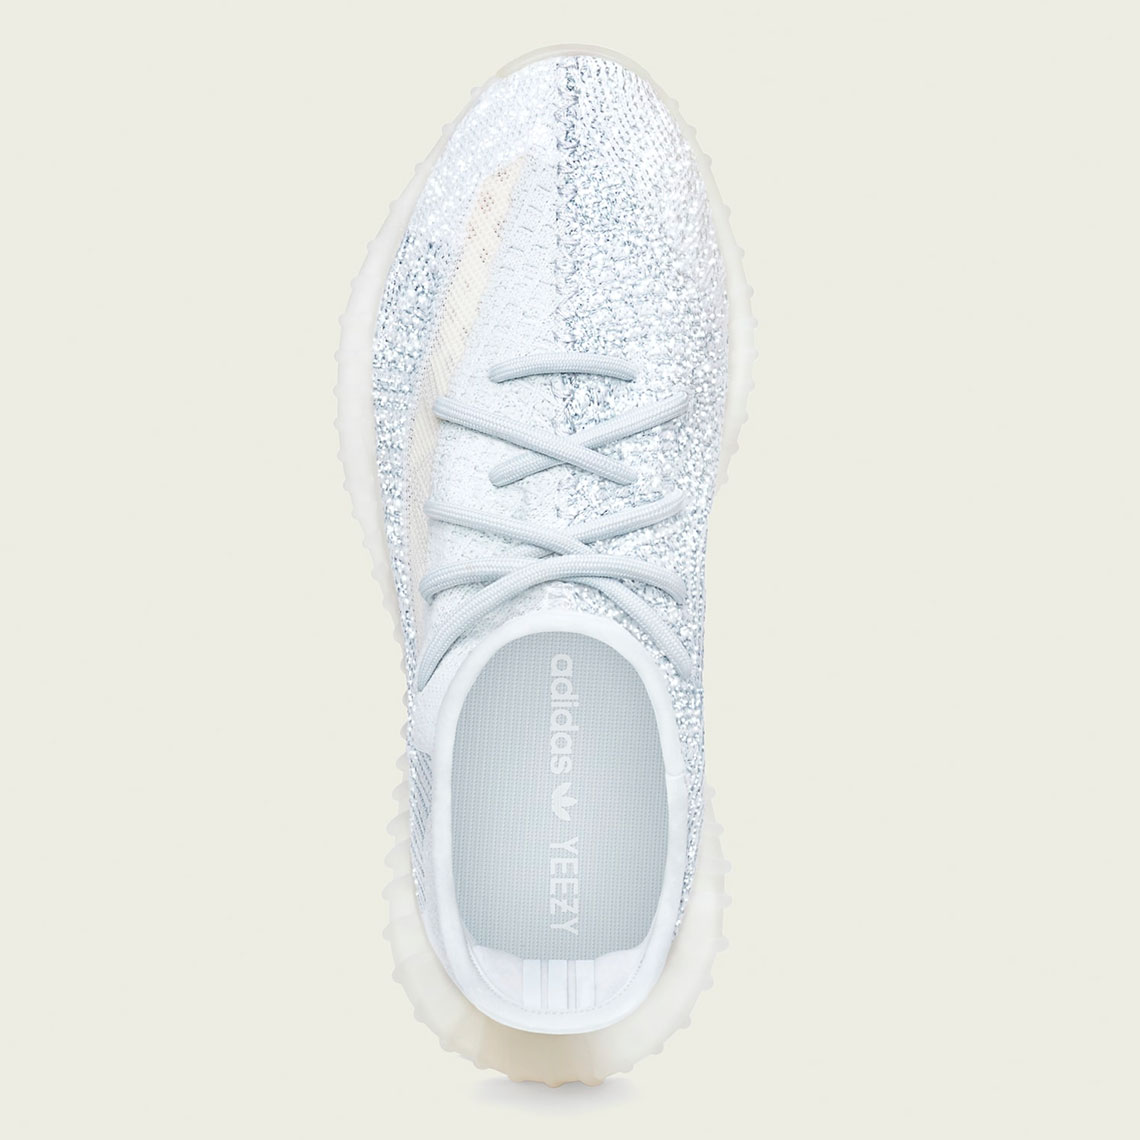 adidas Yeezy Boost 350 v2 Cloud White 